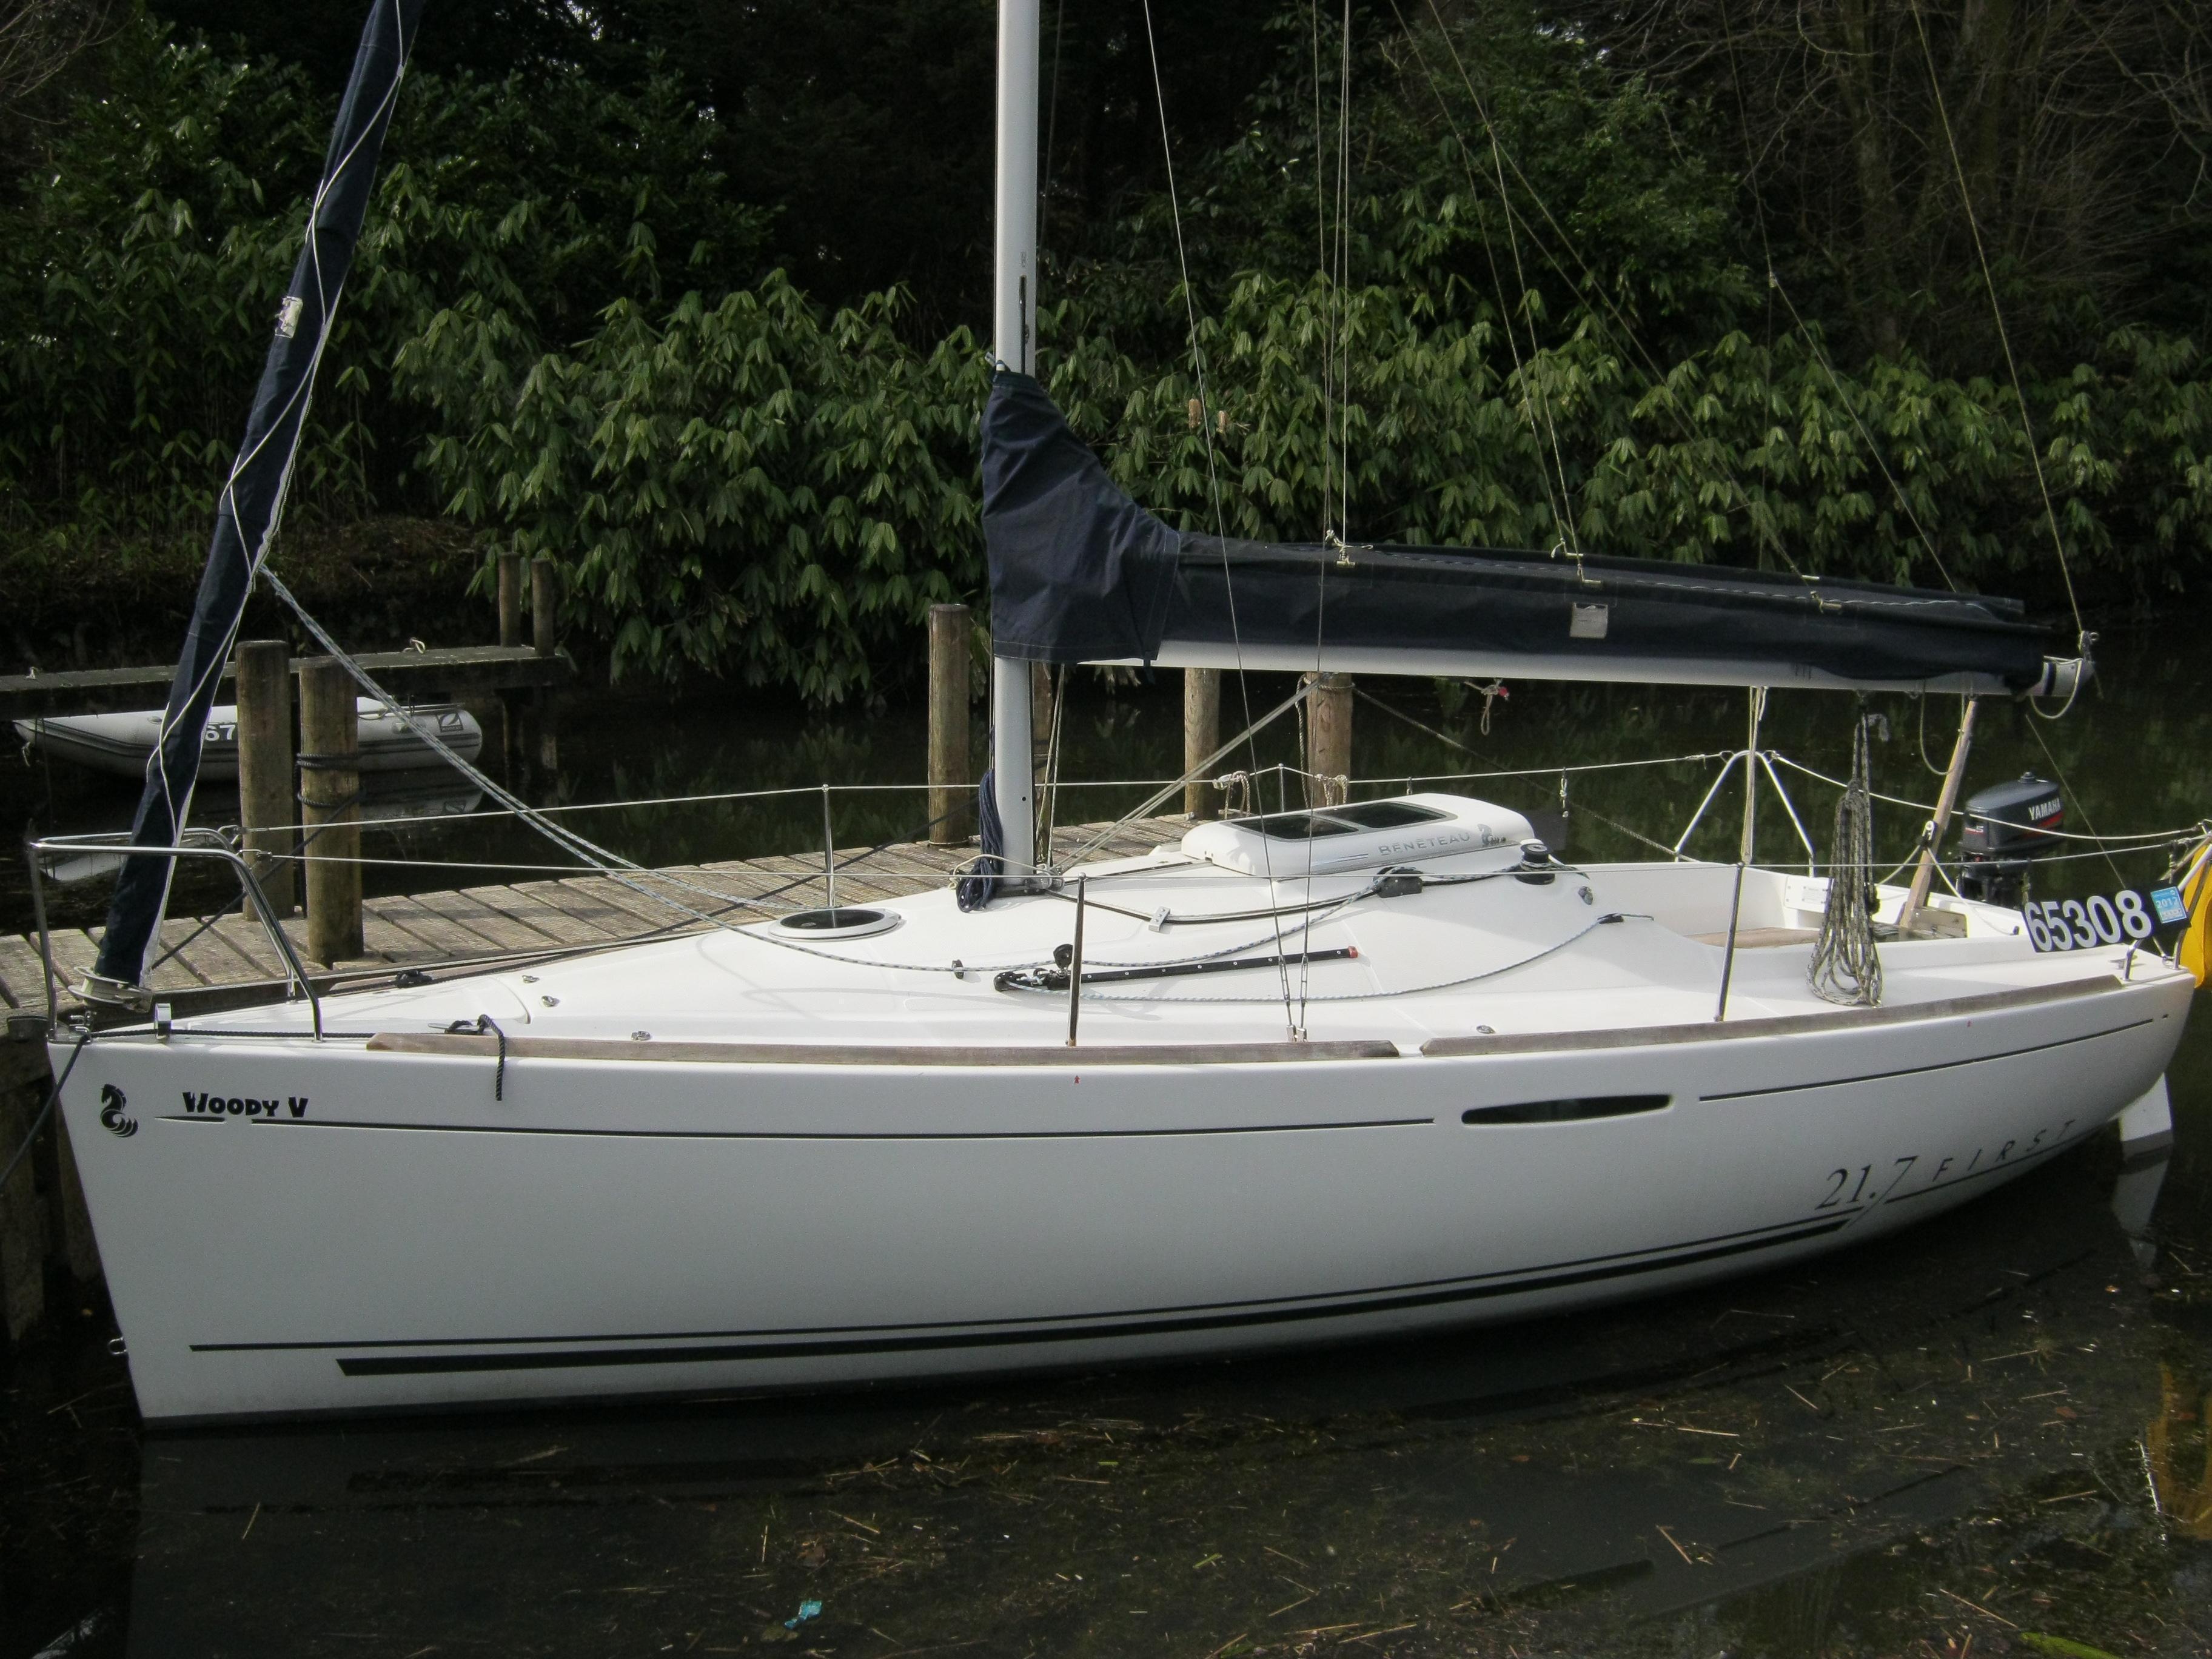 Beneteau First 21.7, Bowness on Windermere, Cumbria